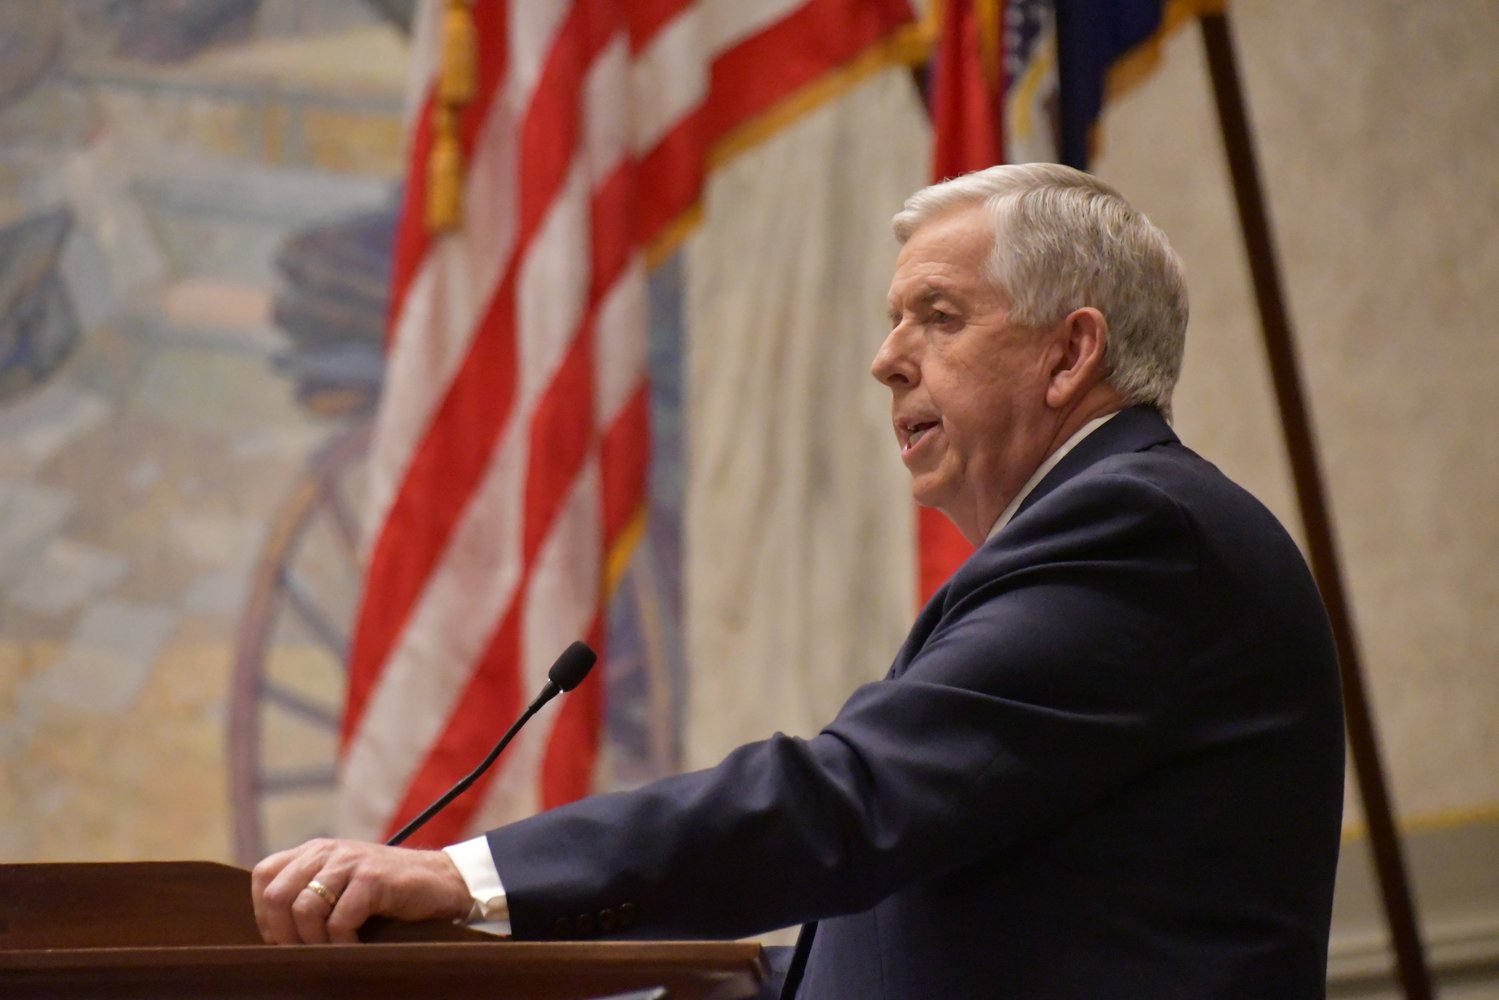 Gov. Mike Parson focuses on upcoming priorities such as workforce development during the State of the State address.